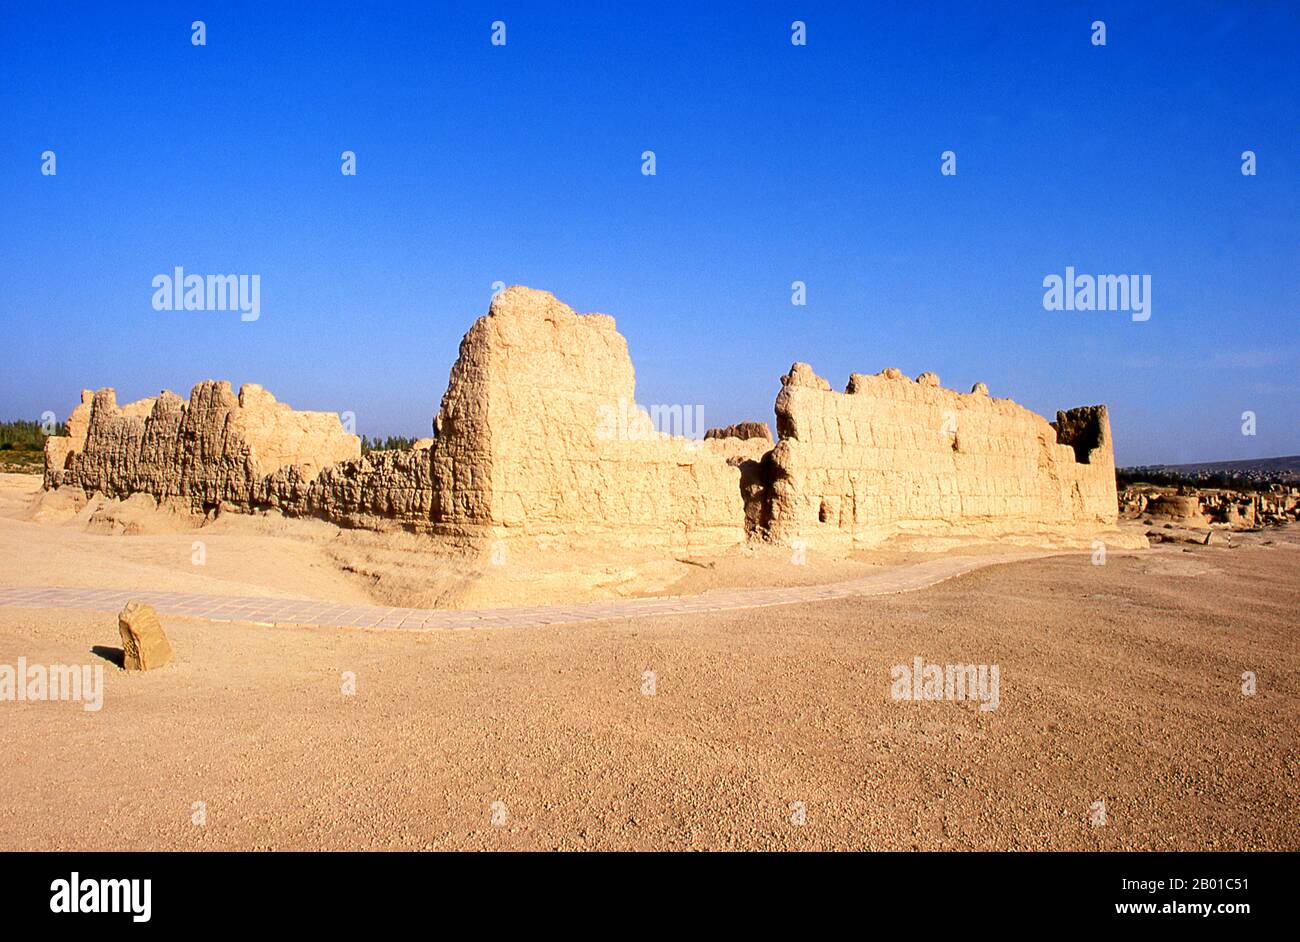 China: Ruins at Yarkhoto or Jiaohe Gucheng (Jiaohe Ancient City), near Turpan, Xinjiang.  Yarkhoto (Jiaohe Ruins) is found in the Yarnaz Valley, 10 km west of the city of Turpan. Yarkhoto was developed as an administrative centre and garrison town by the Chinese following the Han conquest of the area in the 2nd century BC. The city flourished under the Tang Dynasty (618-907), but subsequently went into decline, and was finally abandoned early in the 14th century. Stock Photo